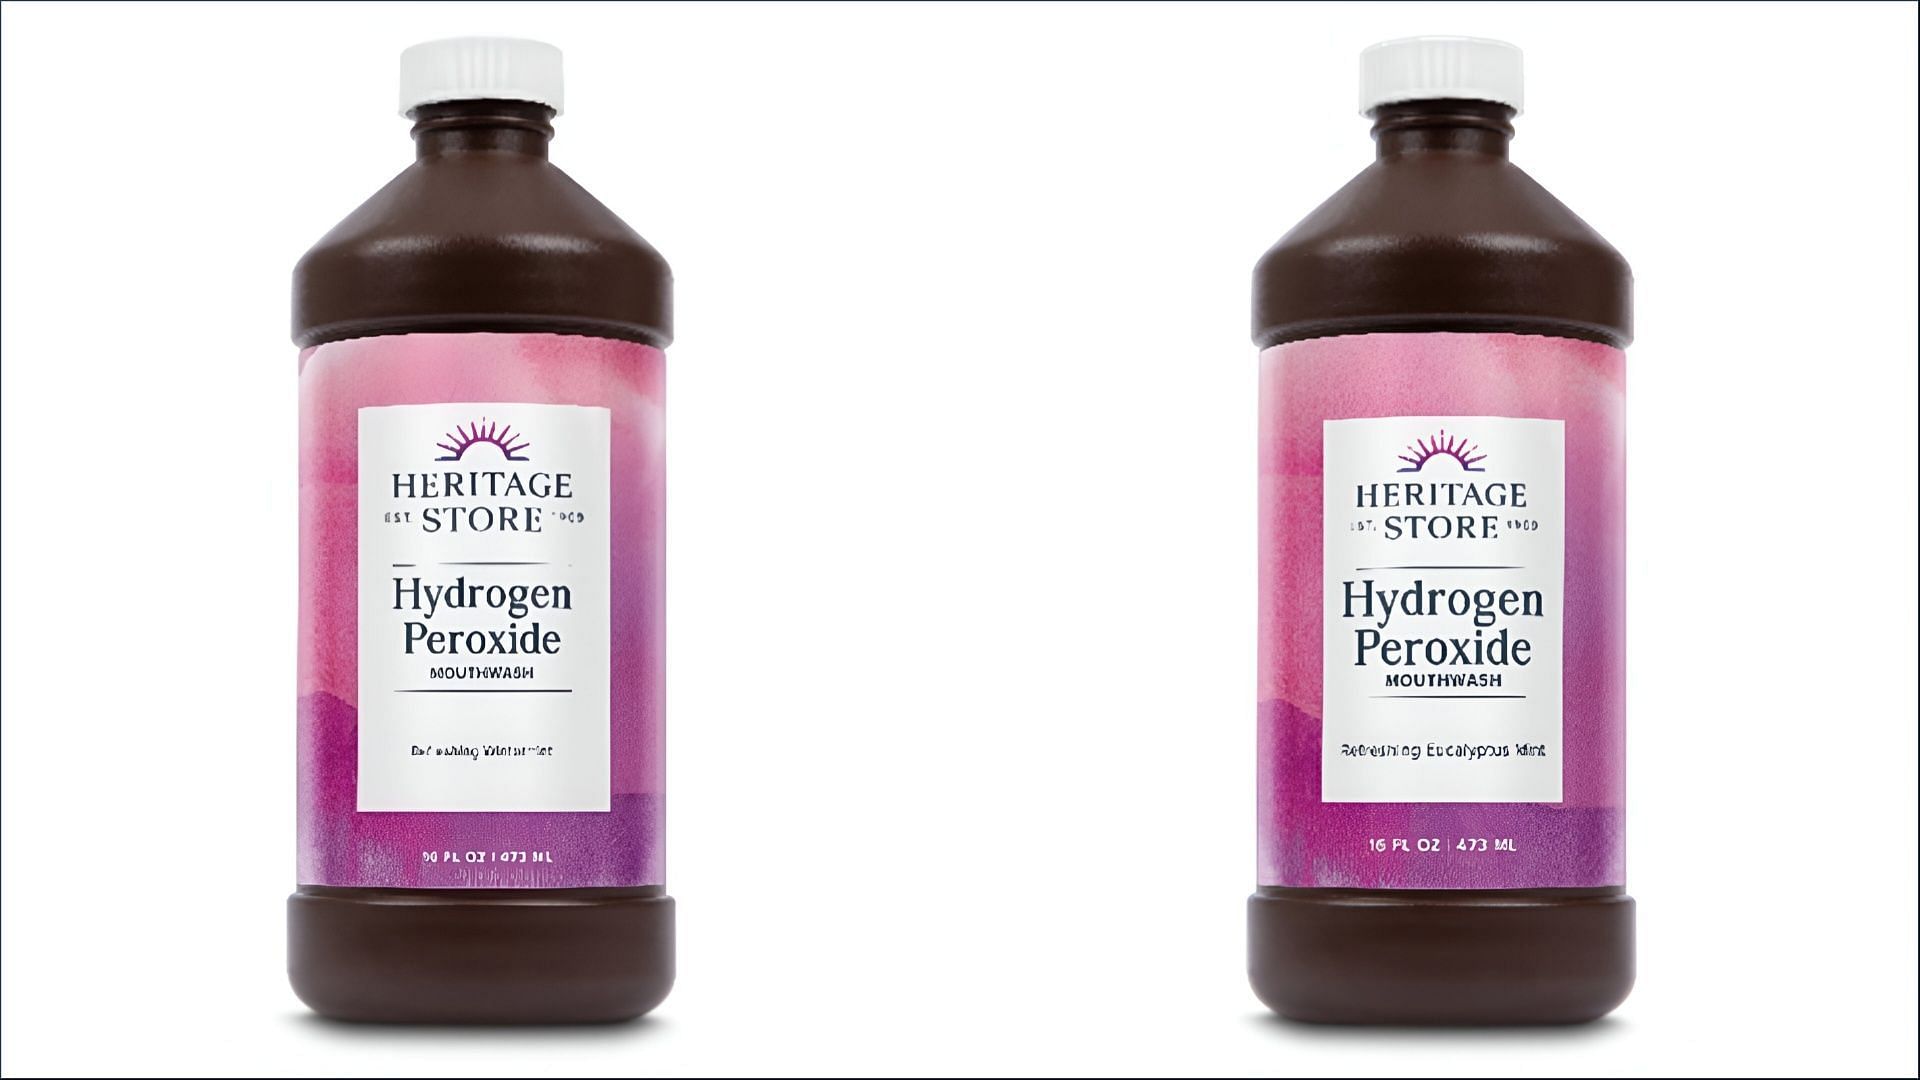 The affected Heritage Store Hydrogen Peroxide Mouthwash products may pose risks of poisoning to children (Image via CPSC)